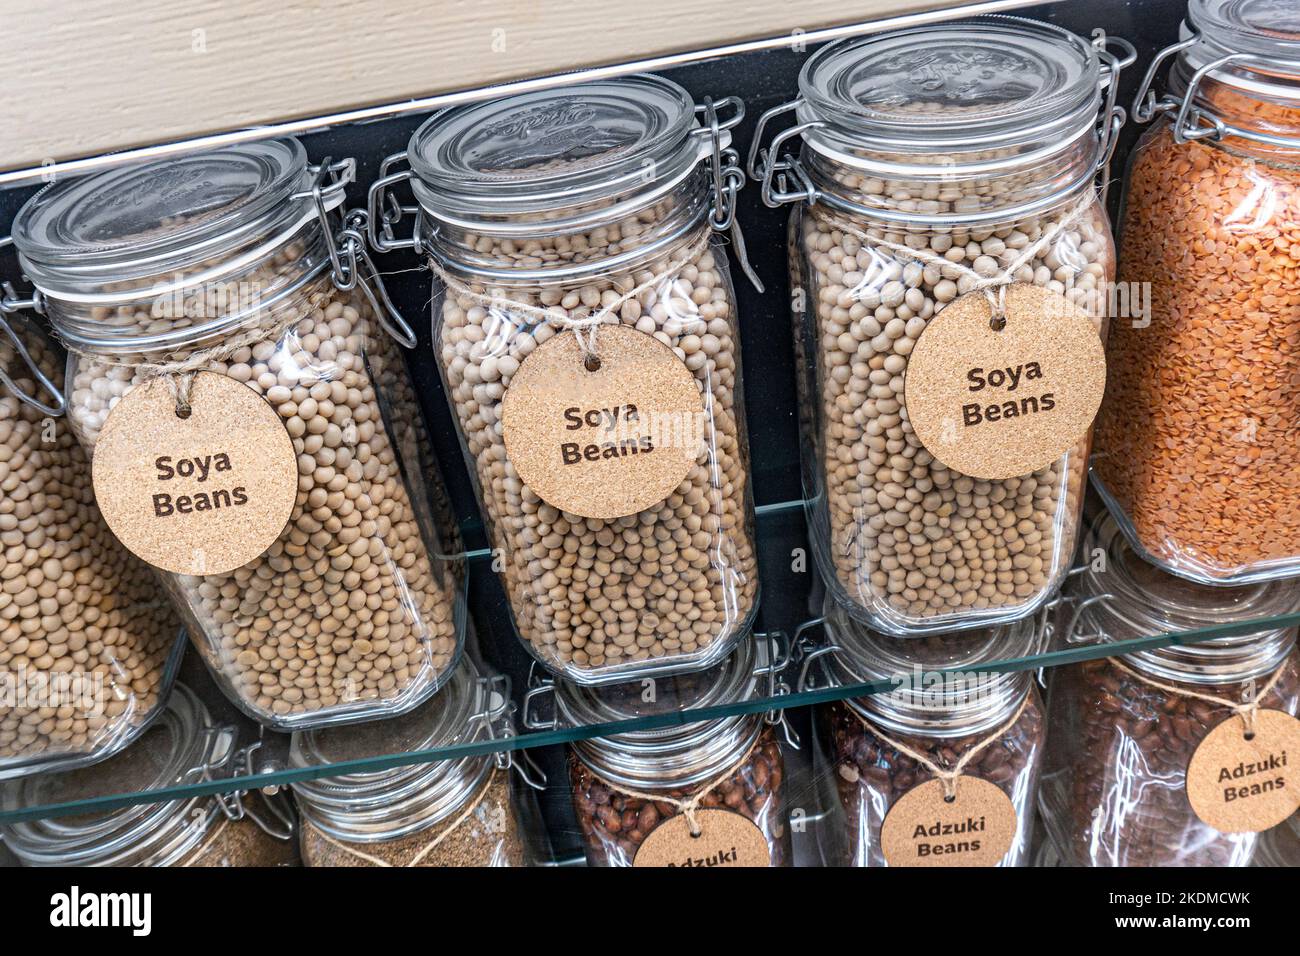 SOYA BEANS GLASS JARS DISPLAY The soybean, soy bean, or soya bean is a species of legume native to East Asia, widely grown for its healthy edible bean Stock Photo